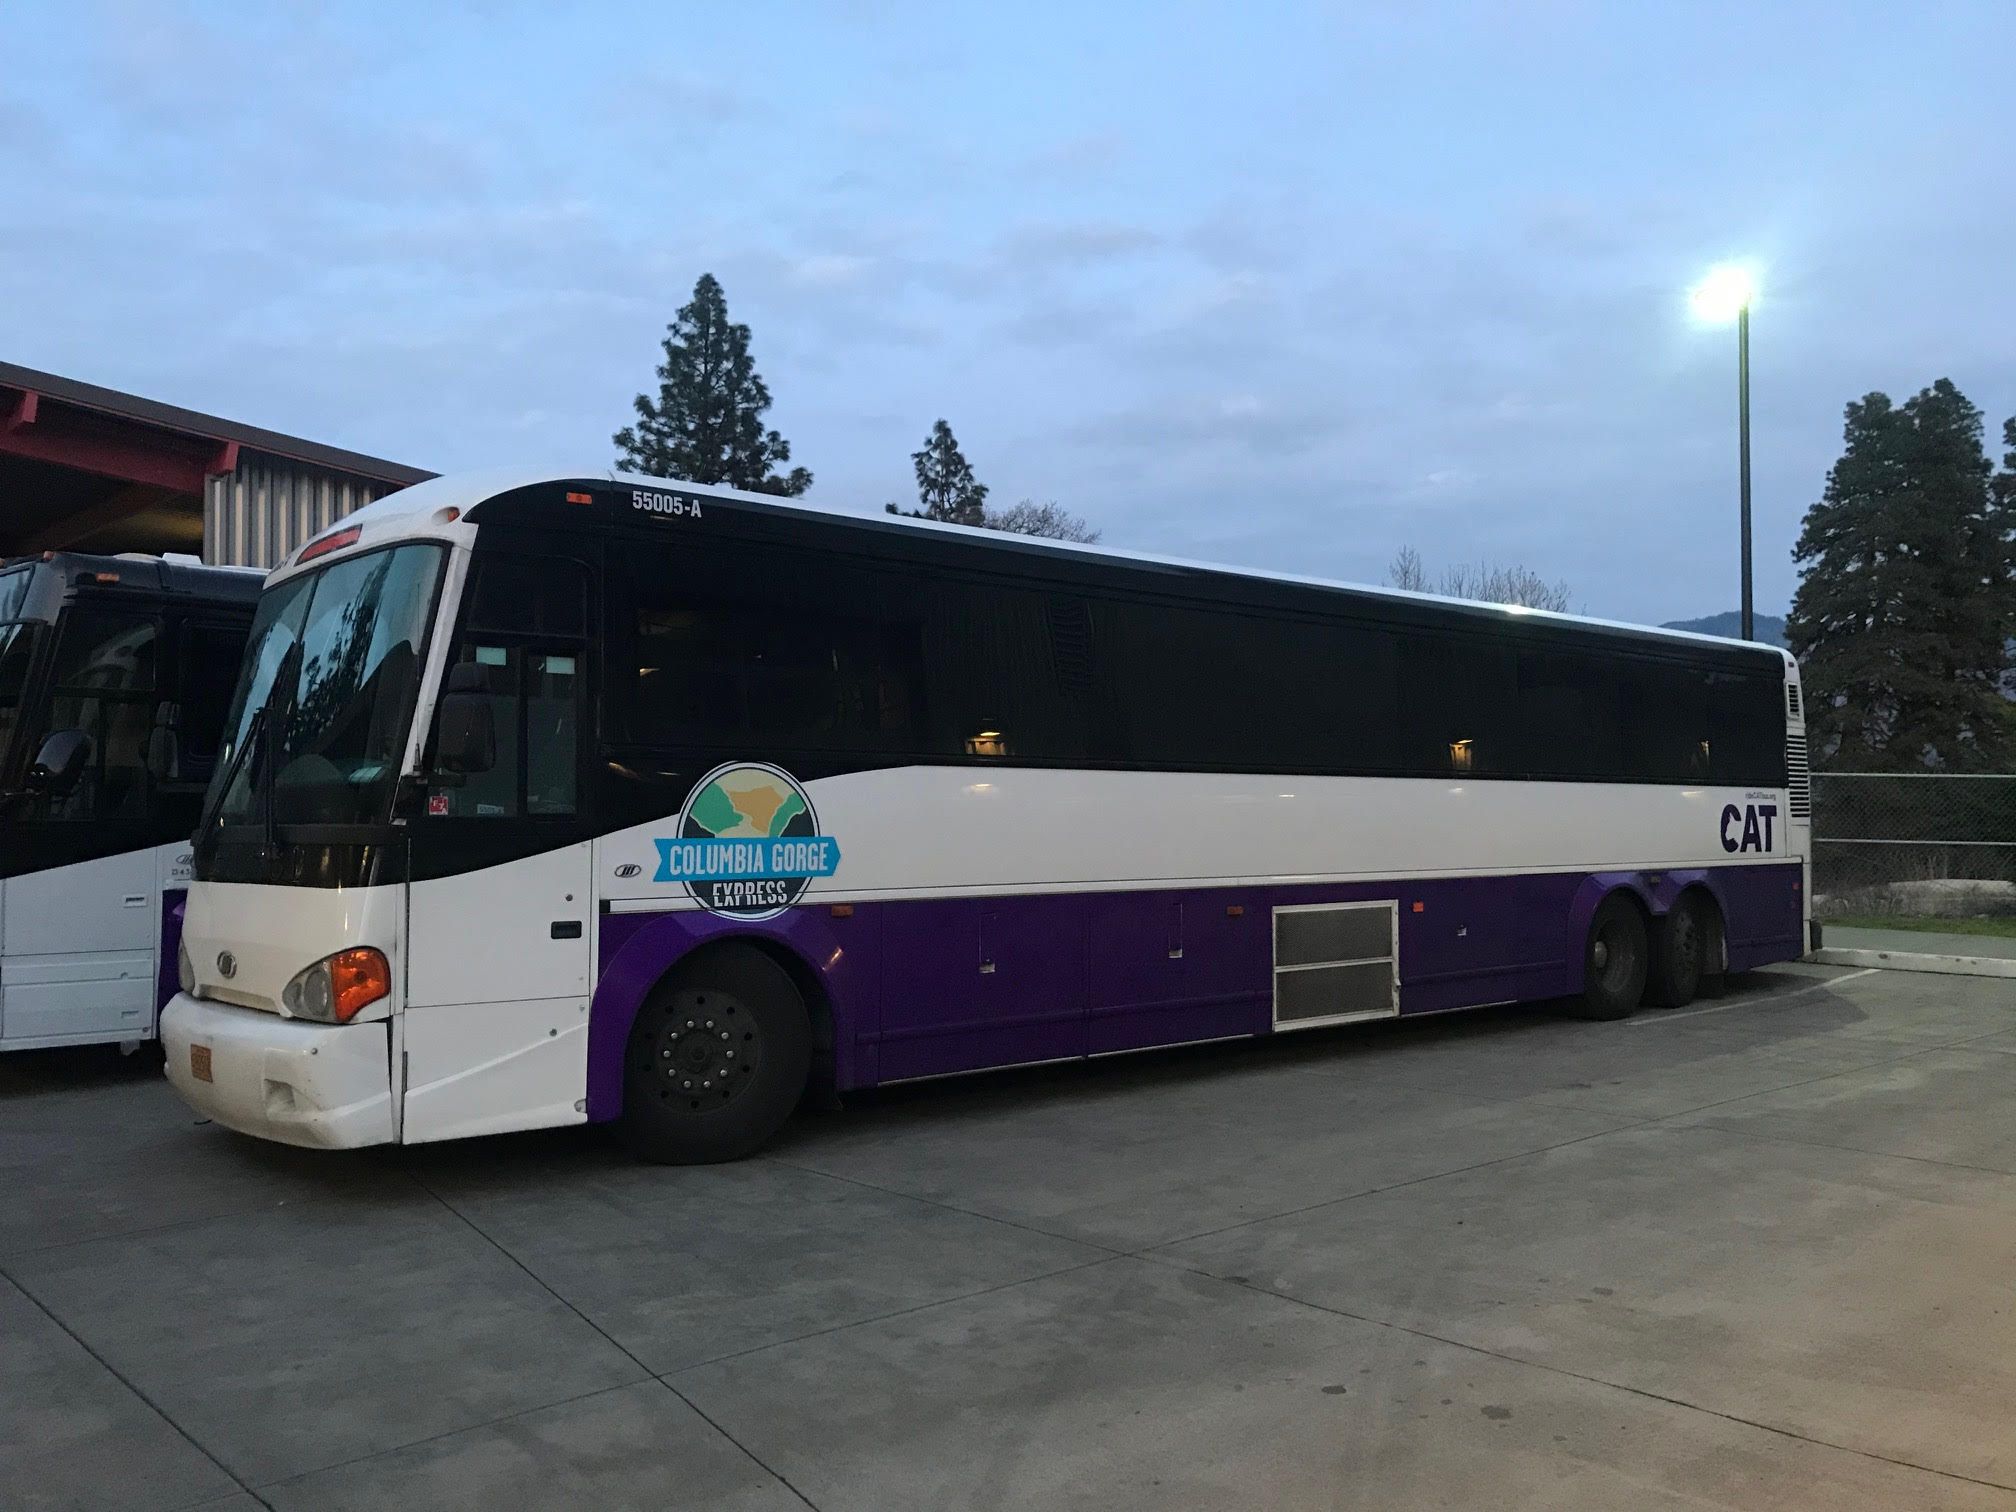 image of the Columbia Gorge Express bus courtesy of the Columbia Area Transit - CAT